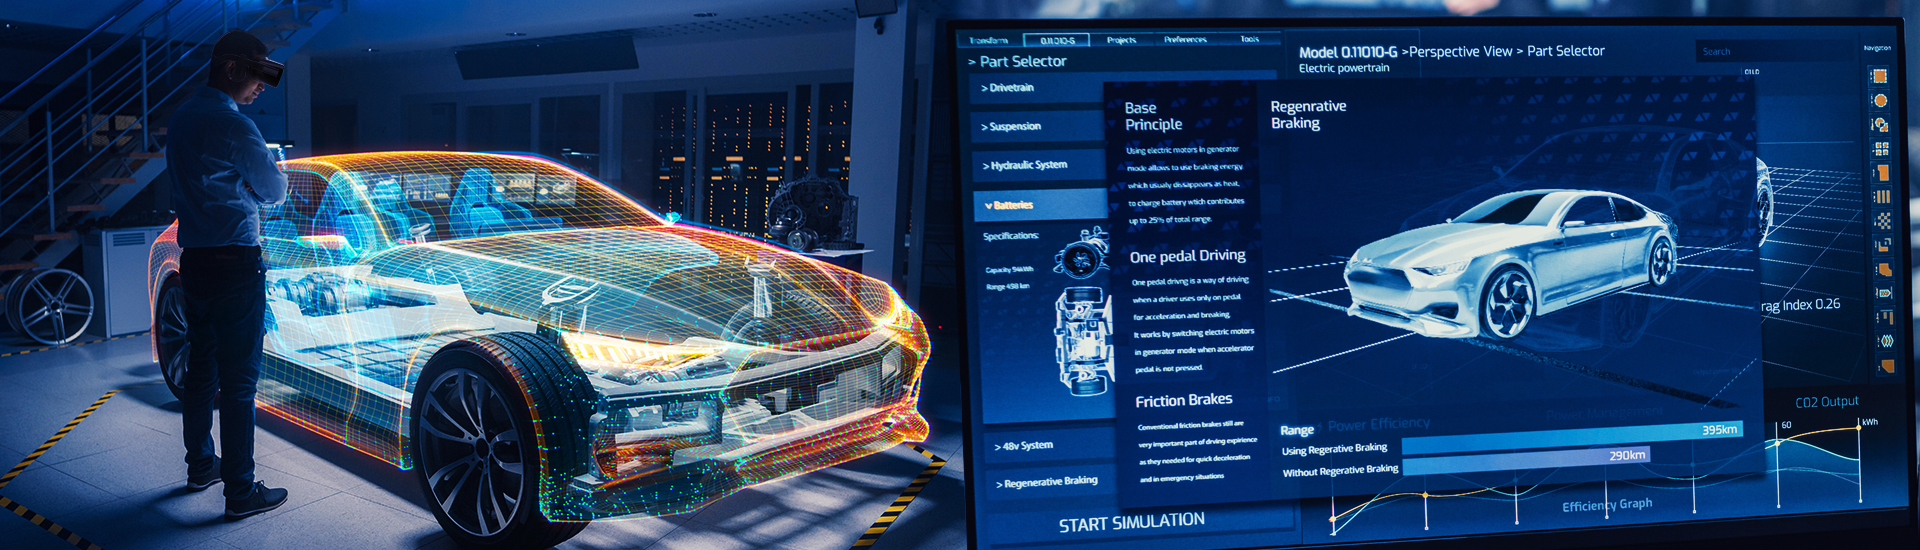 The latest technology in the automotive field - Augmented Reality (AR) and Virtual Reality (VR) in Automotive